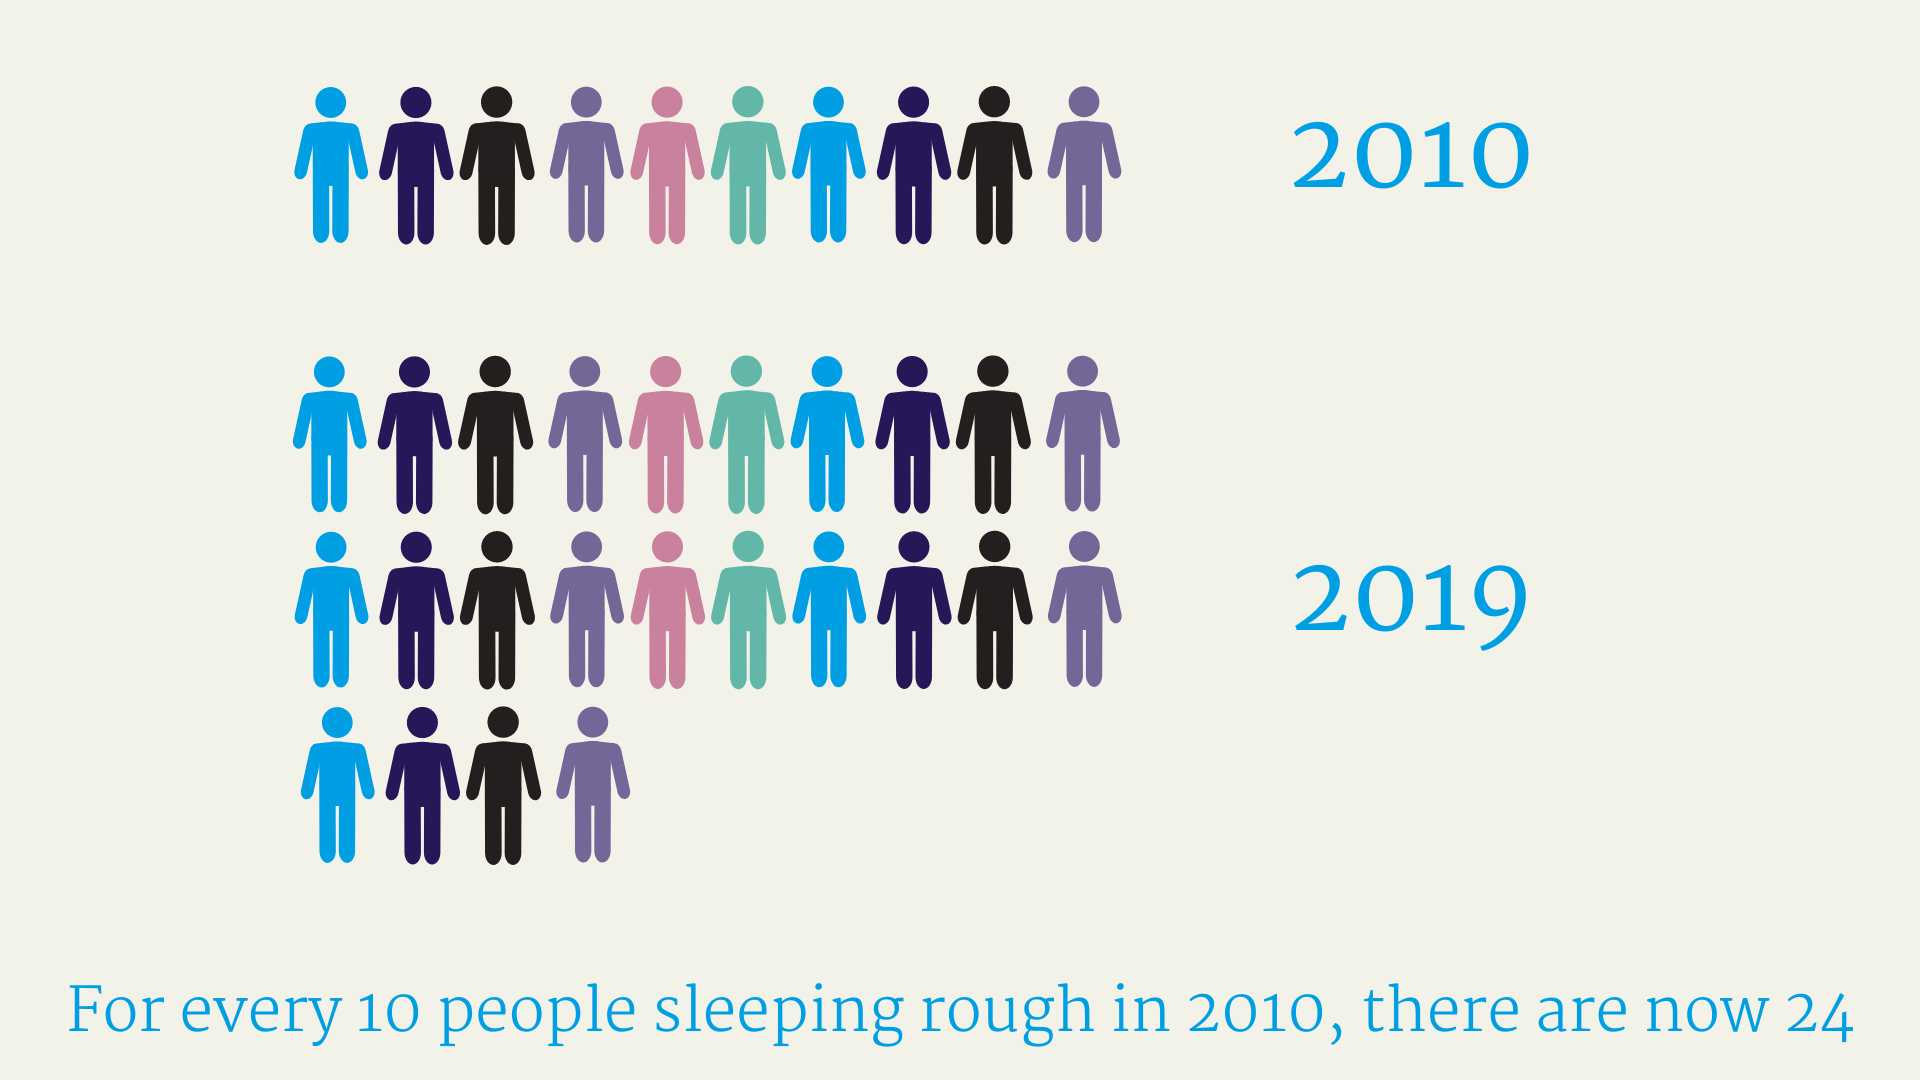 For every 10 people sleeping rough in 2010 there were 24 in 2019